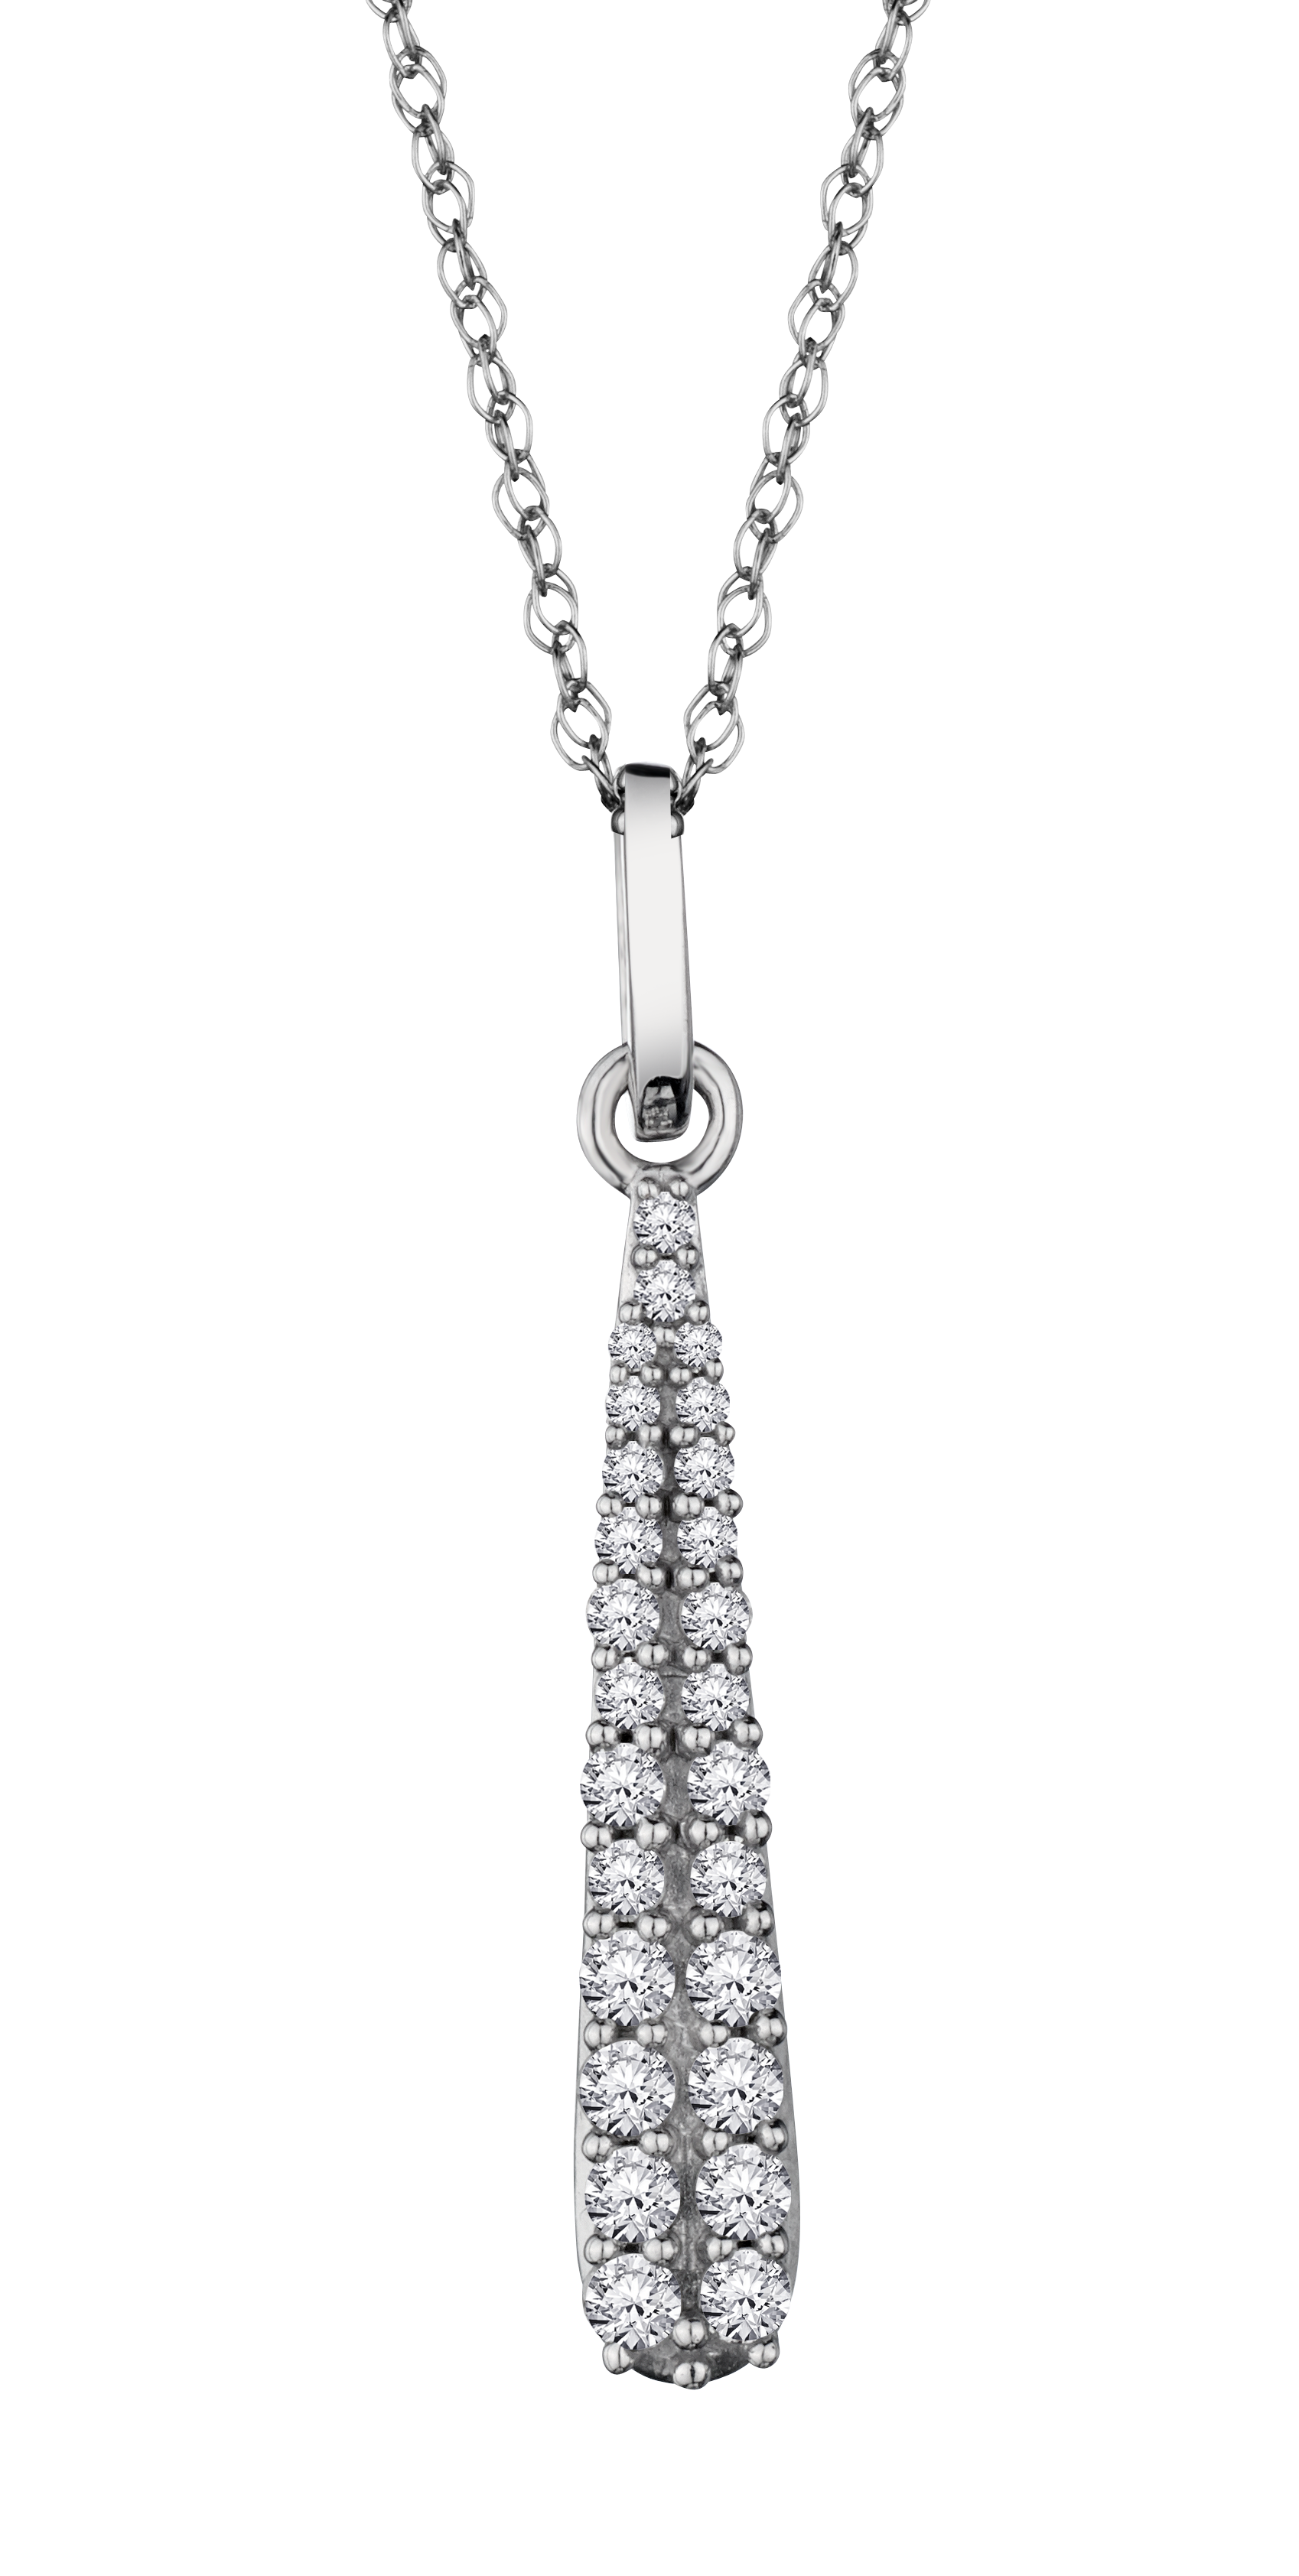 .25 Carat of Diamonds "Icicle" Pendant, 10kt White Gold.....................NOW